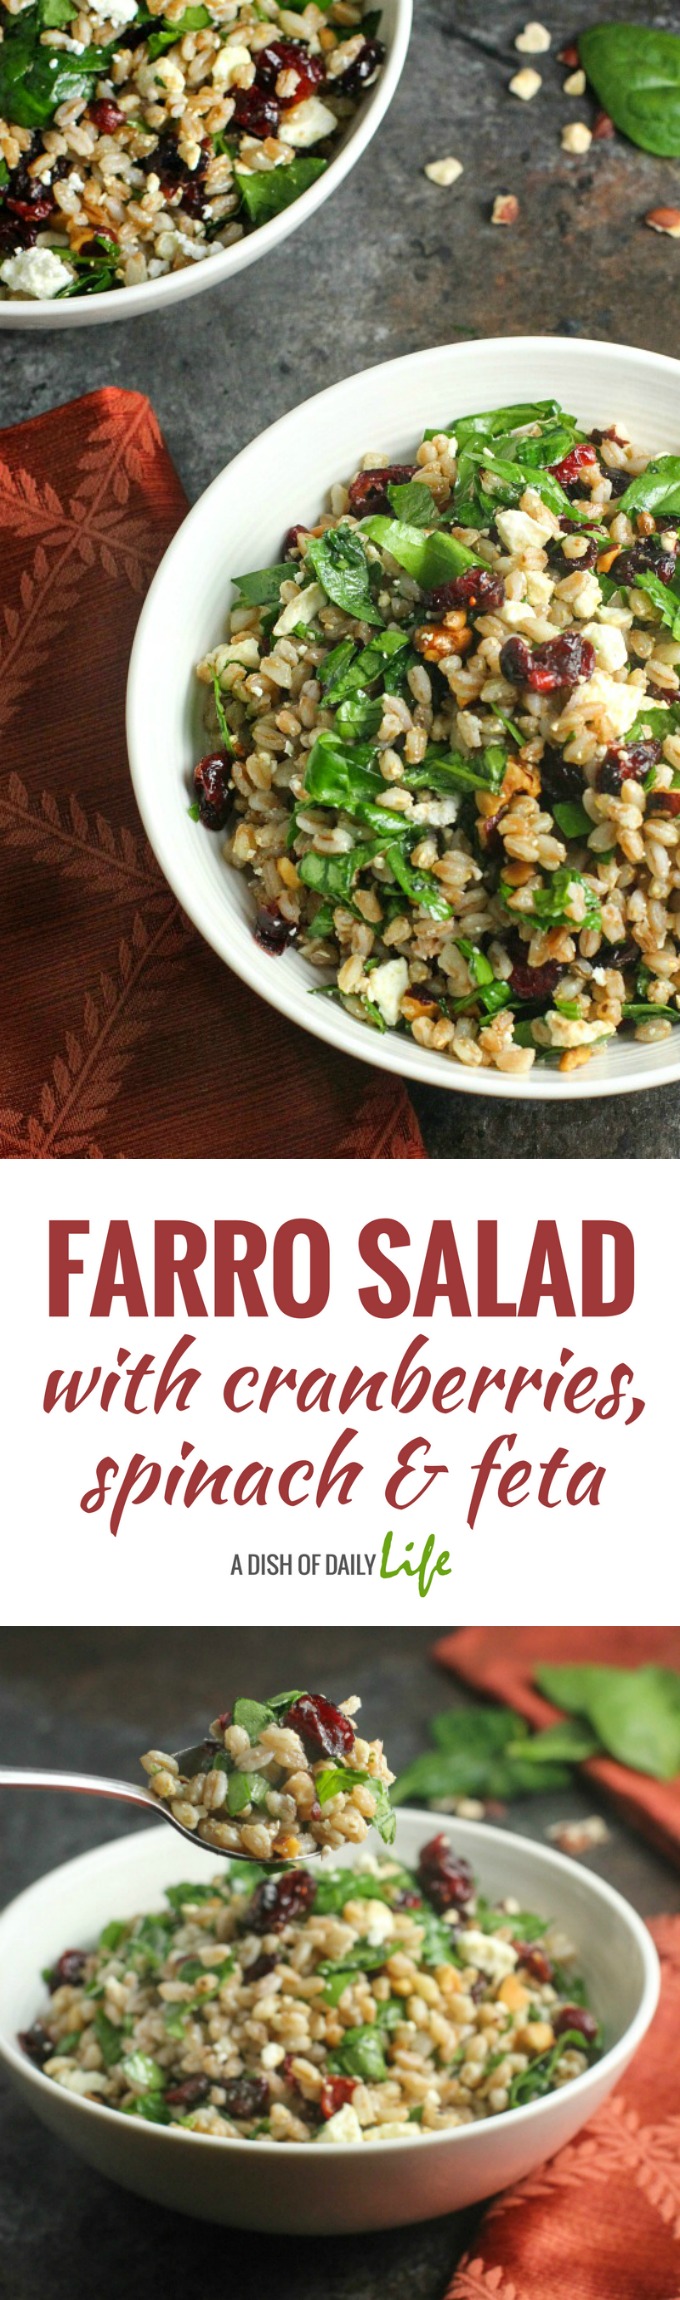 Healthy and delicious, this easy Farro Salad with spinach, cranberries and feta, topped with balsamic dressing, is a wonderful addition to your menu any time of year.  #salad | #farro | #sidedishes